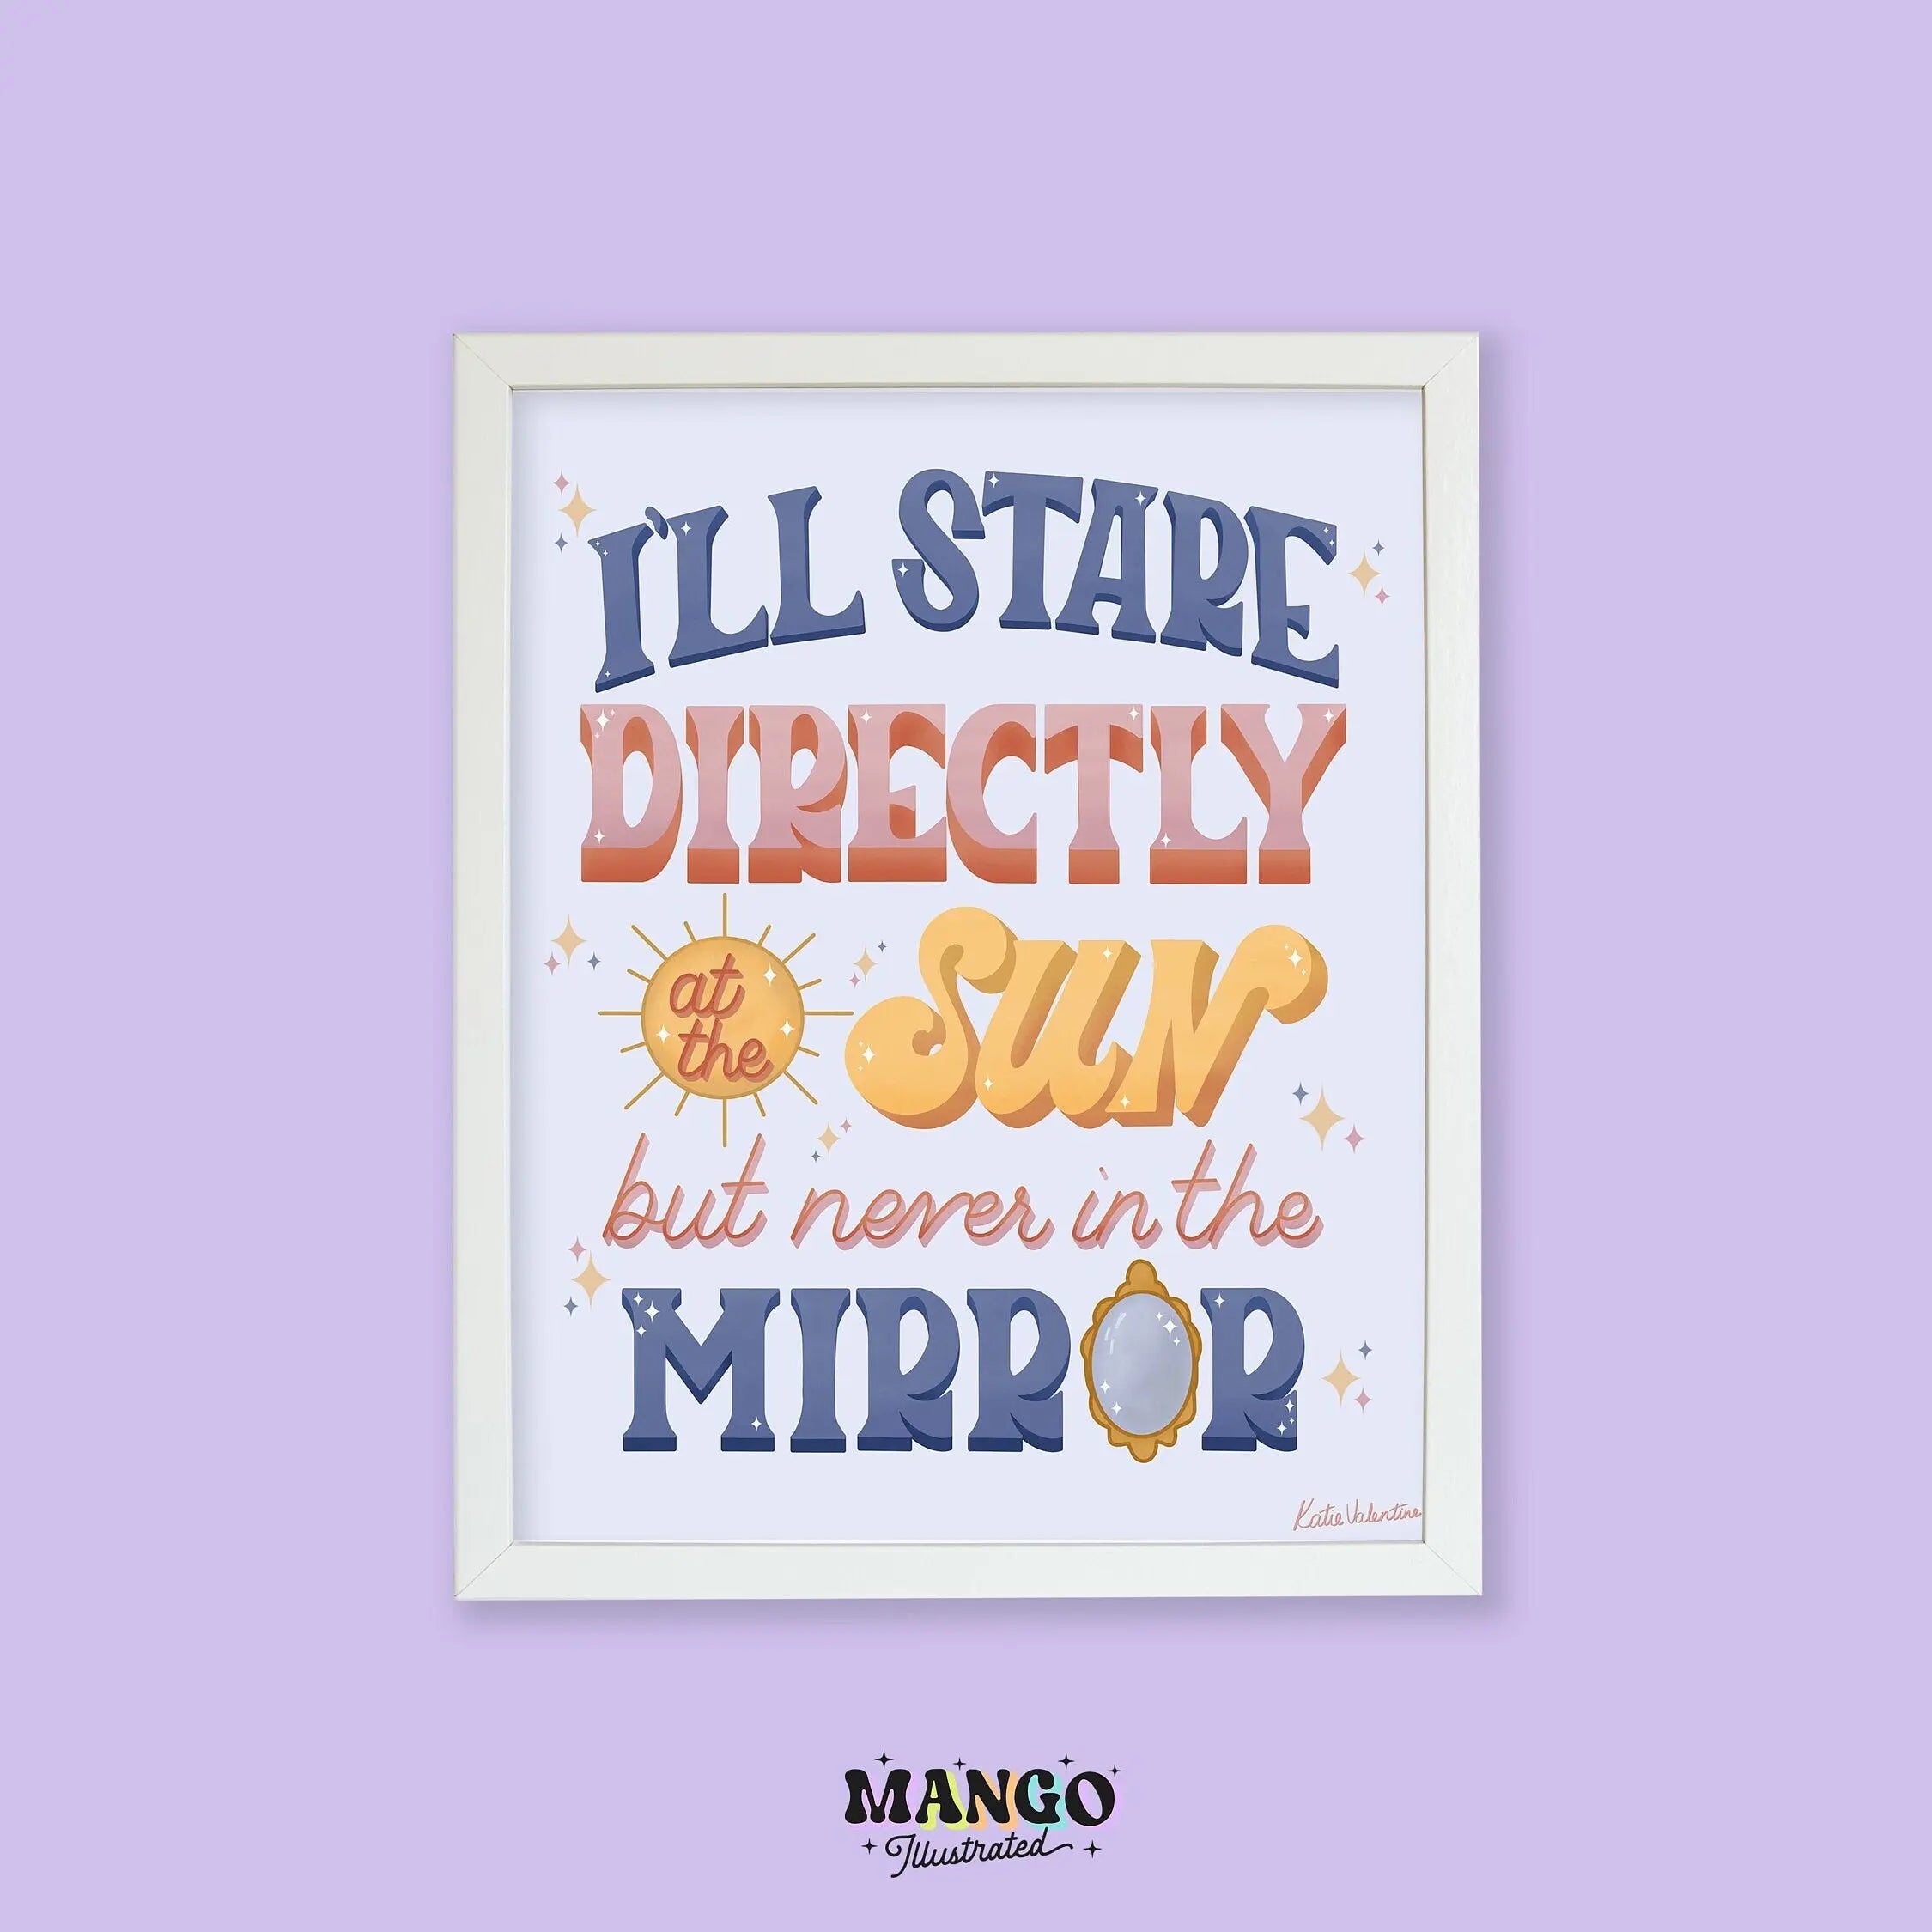 I’ll Stare Directly at the Sun but Never in the Mirror art print MangoIllustrated